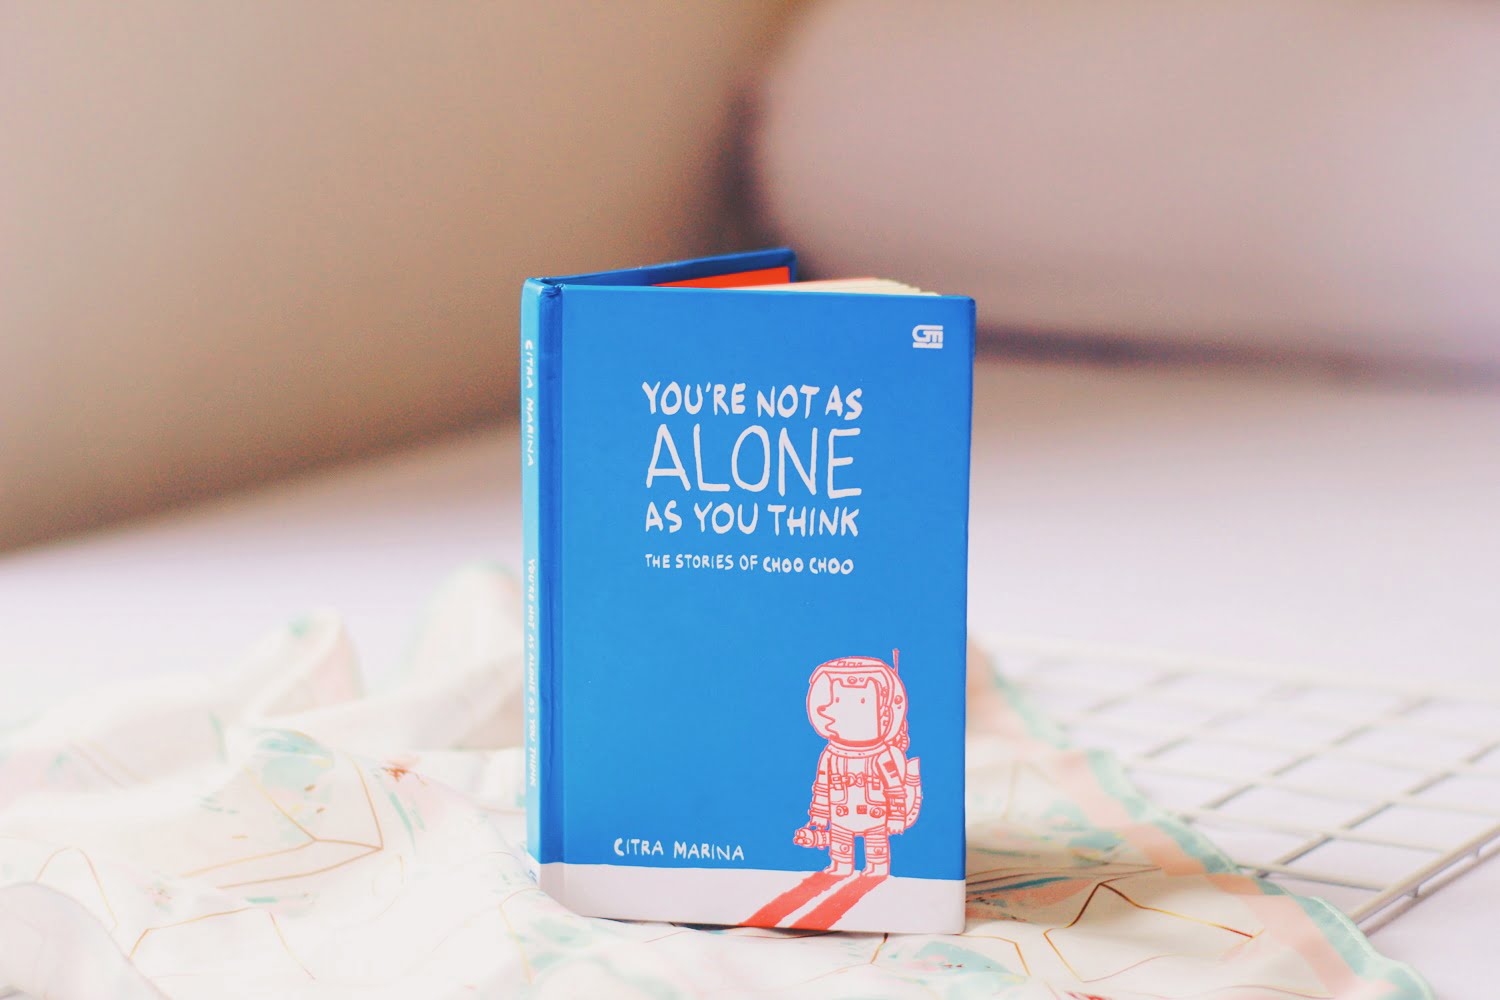 [BOOK REVIEW] The Stories of Choo Choo You're Not as Alone as You Think Karya Citra Marina